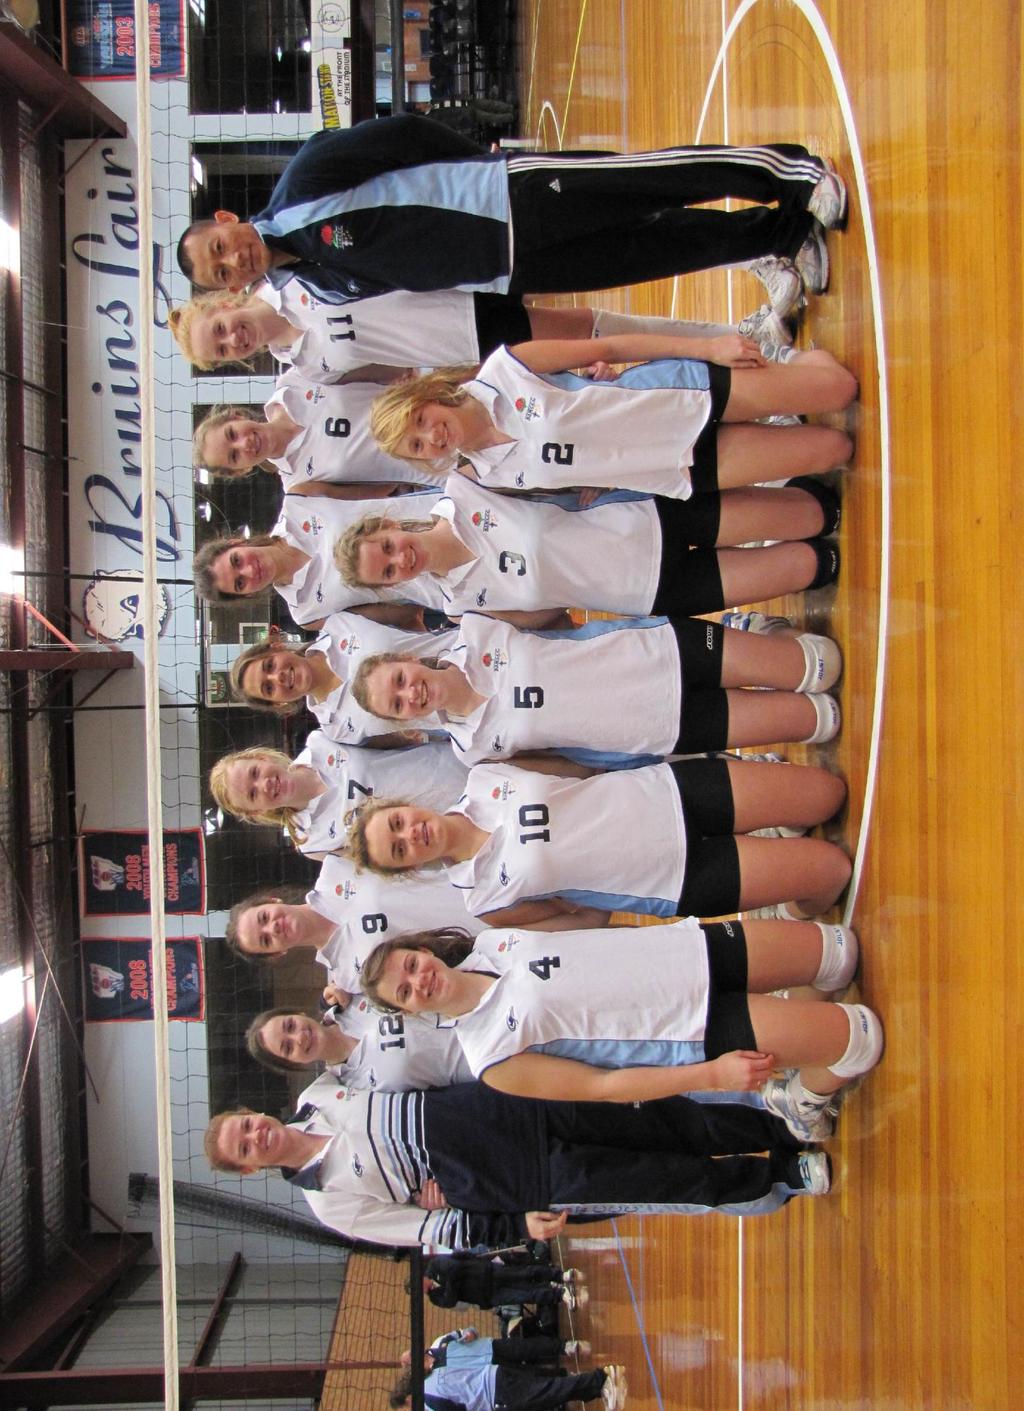 NSWCCC Open Girl s Volleyball Team 2010 Left to Right - Back Row Natalie Frostick (Manager) Tegan Holt (Santa Sabina College Strathfield) Claire Walker (Santa Sabina College Strathfield ) Lily Borger